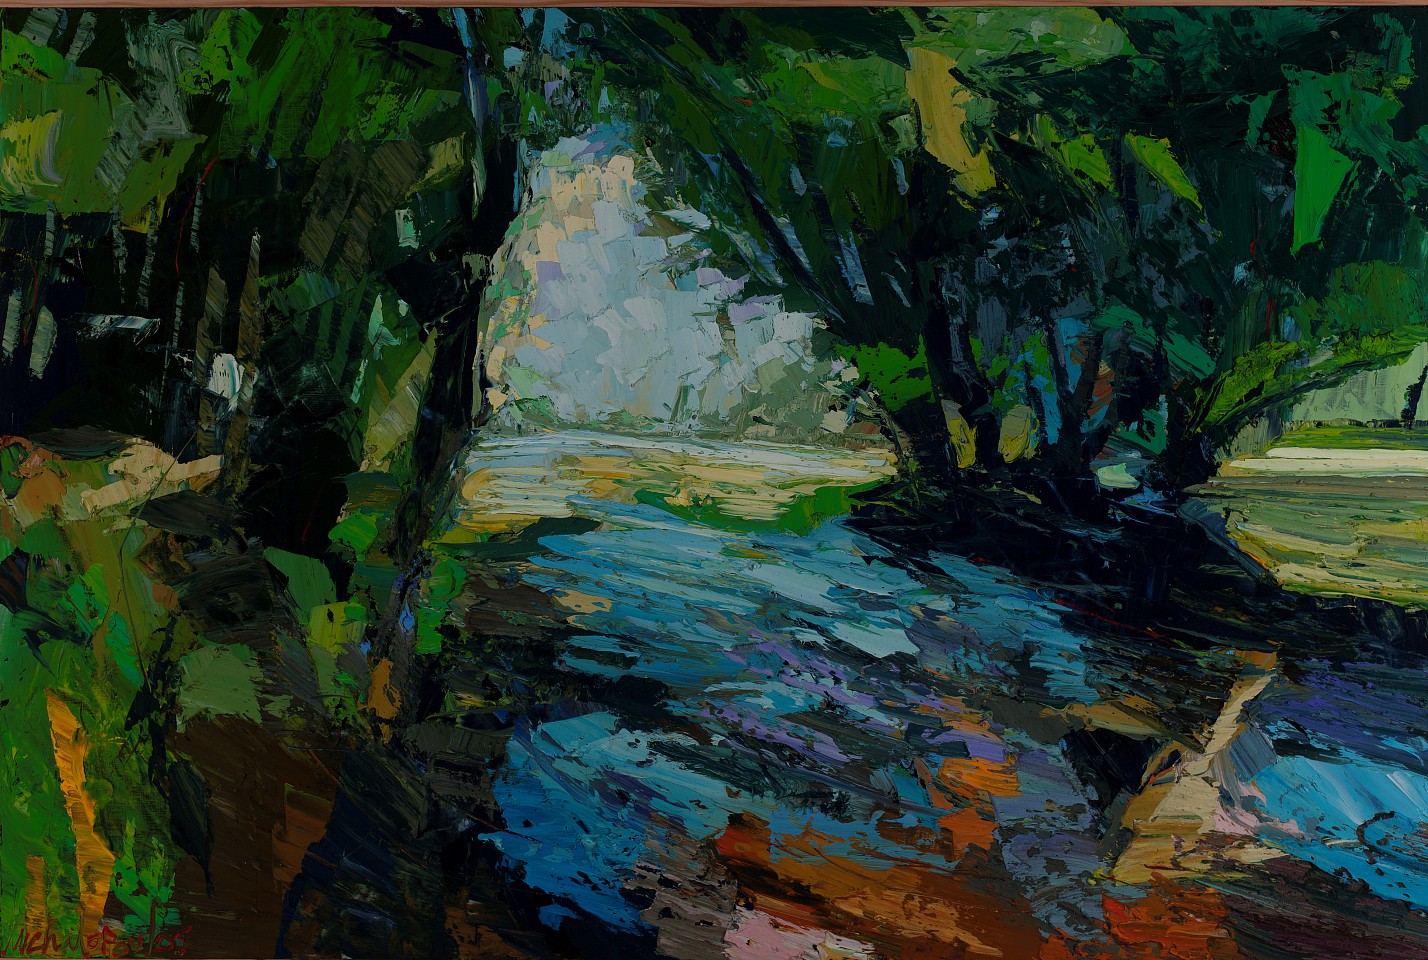 James Michalopoulos, Where Water Was Wetter
Oil on Wood, 40 x 60 in.
$21,500